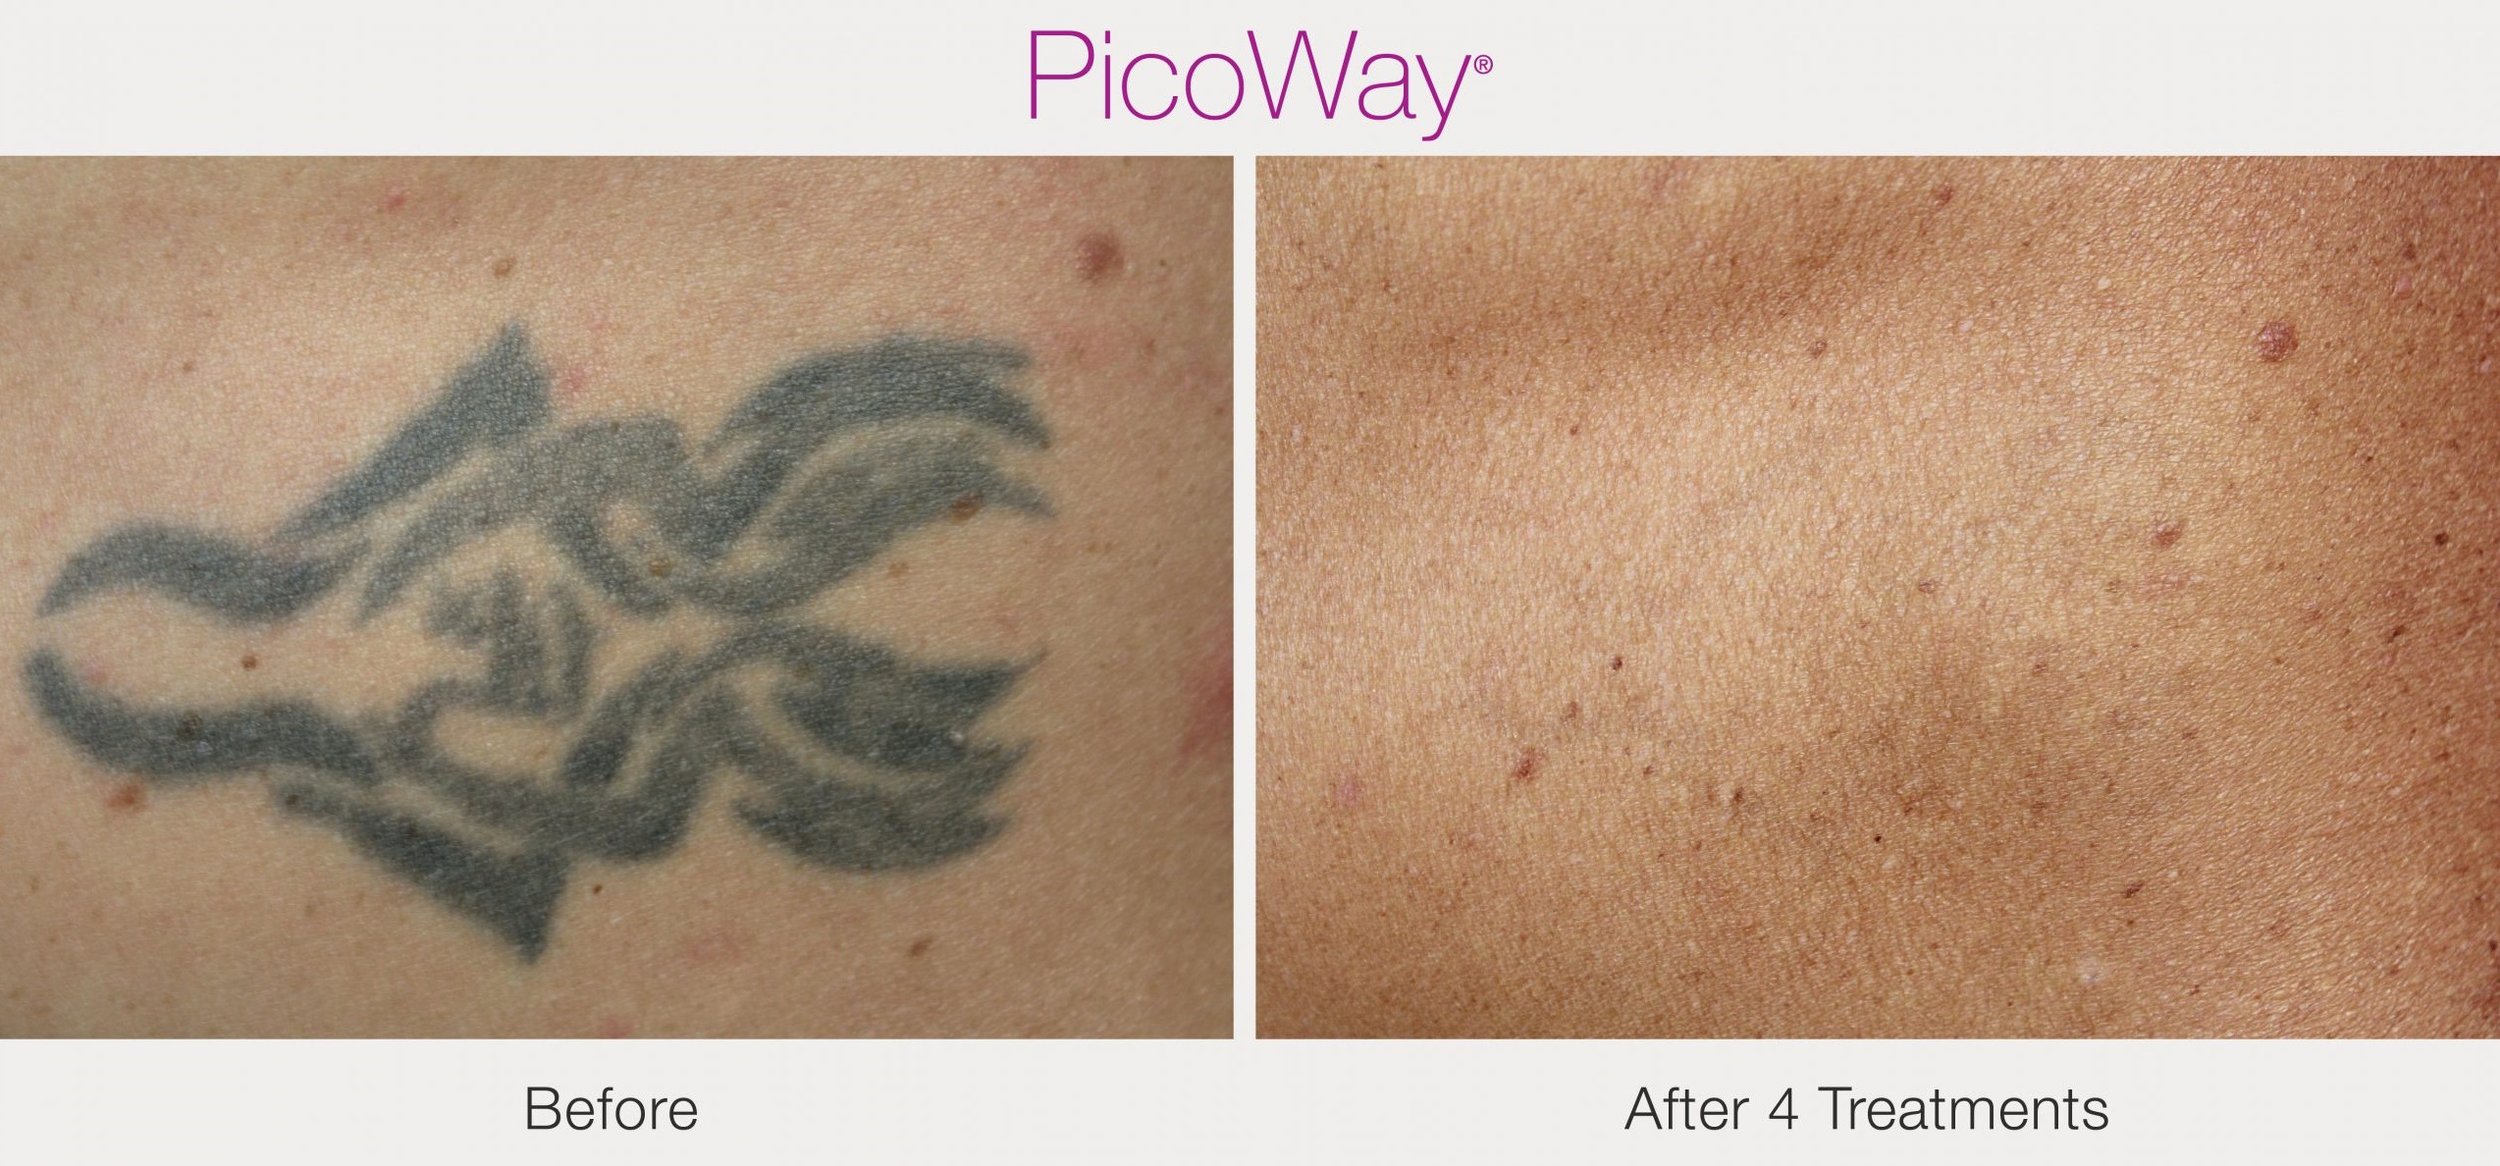 Tattoo removal treatments  How long to wait in between treatments